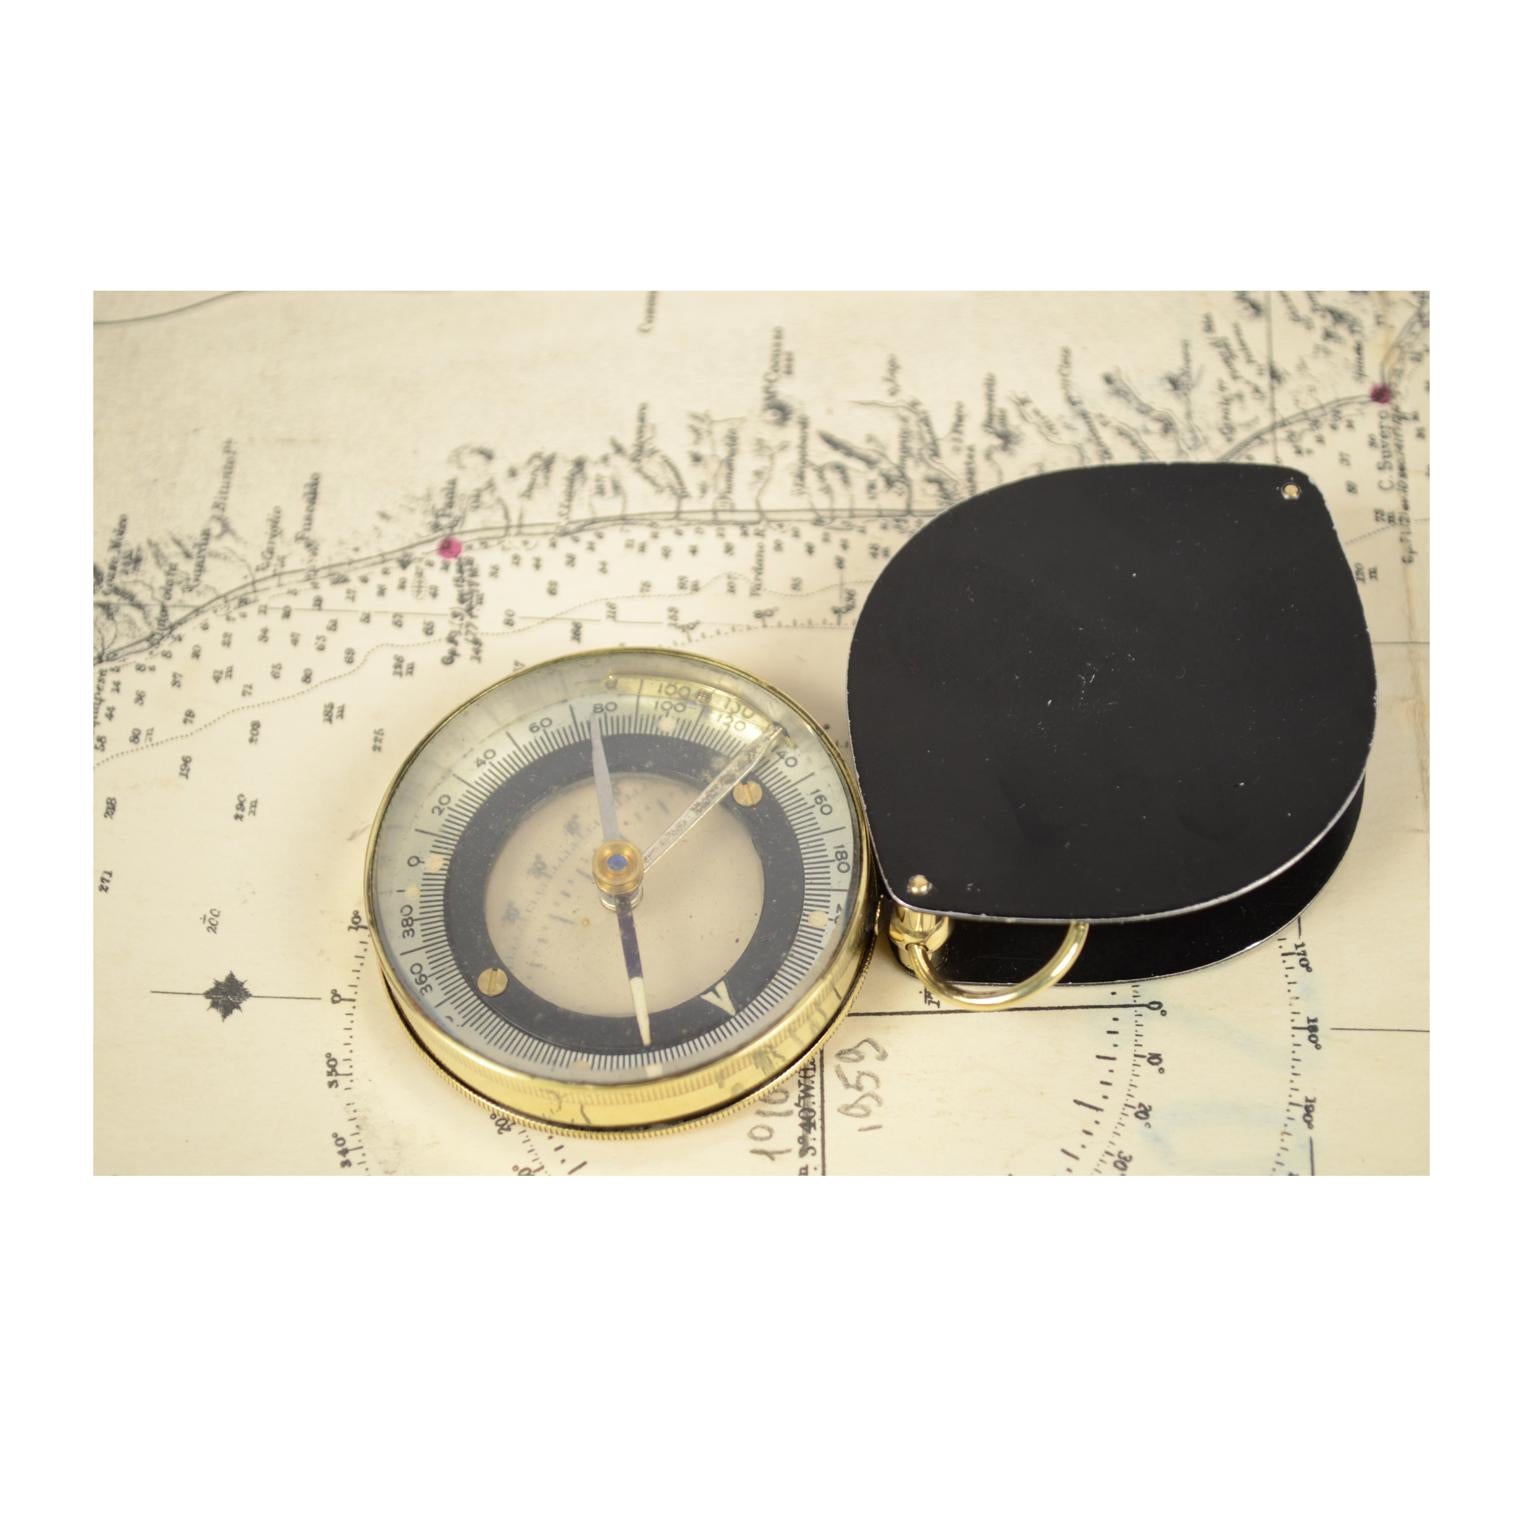 Rare brass air balloon compass complete with goniometric circle, needle block and transparent bottom. Placed in a container with black painted metal ring. French manufacture of the early twentieth century. Very good condition, fully functional.